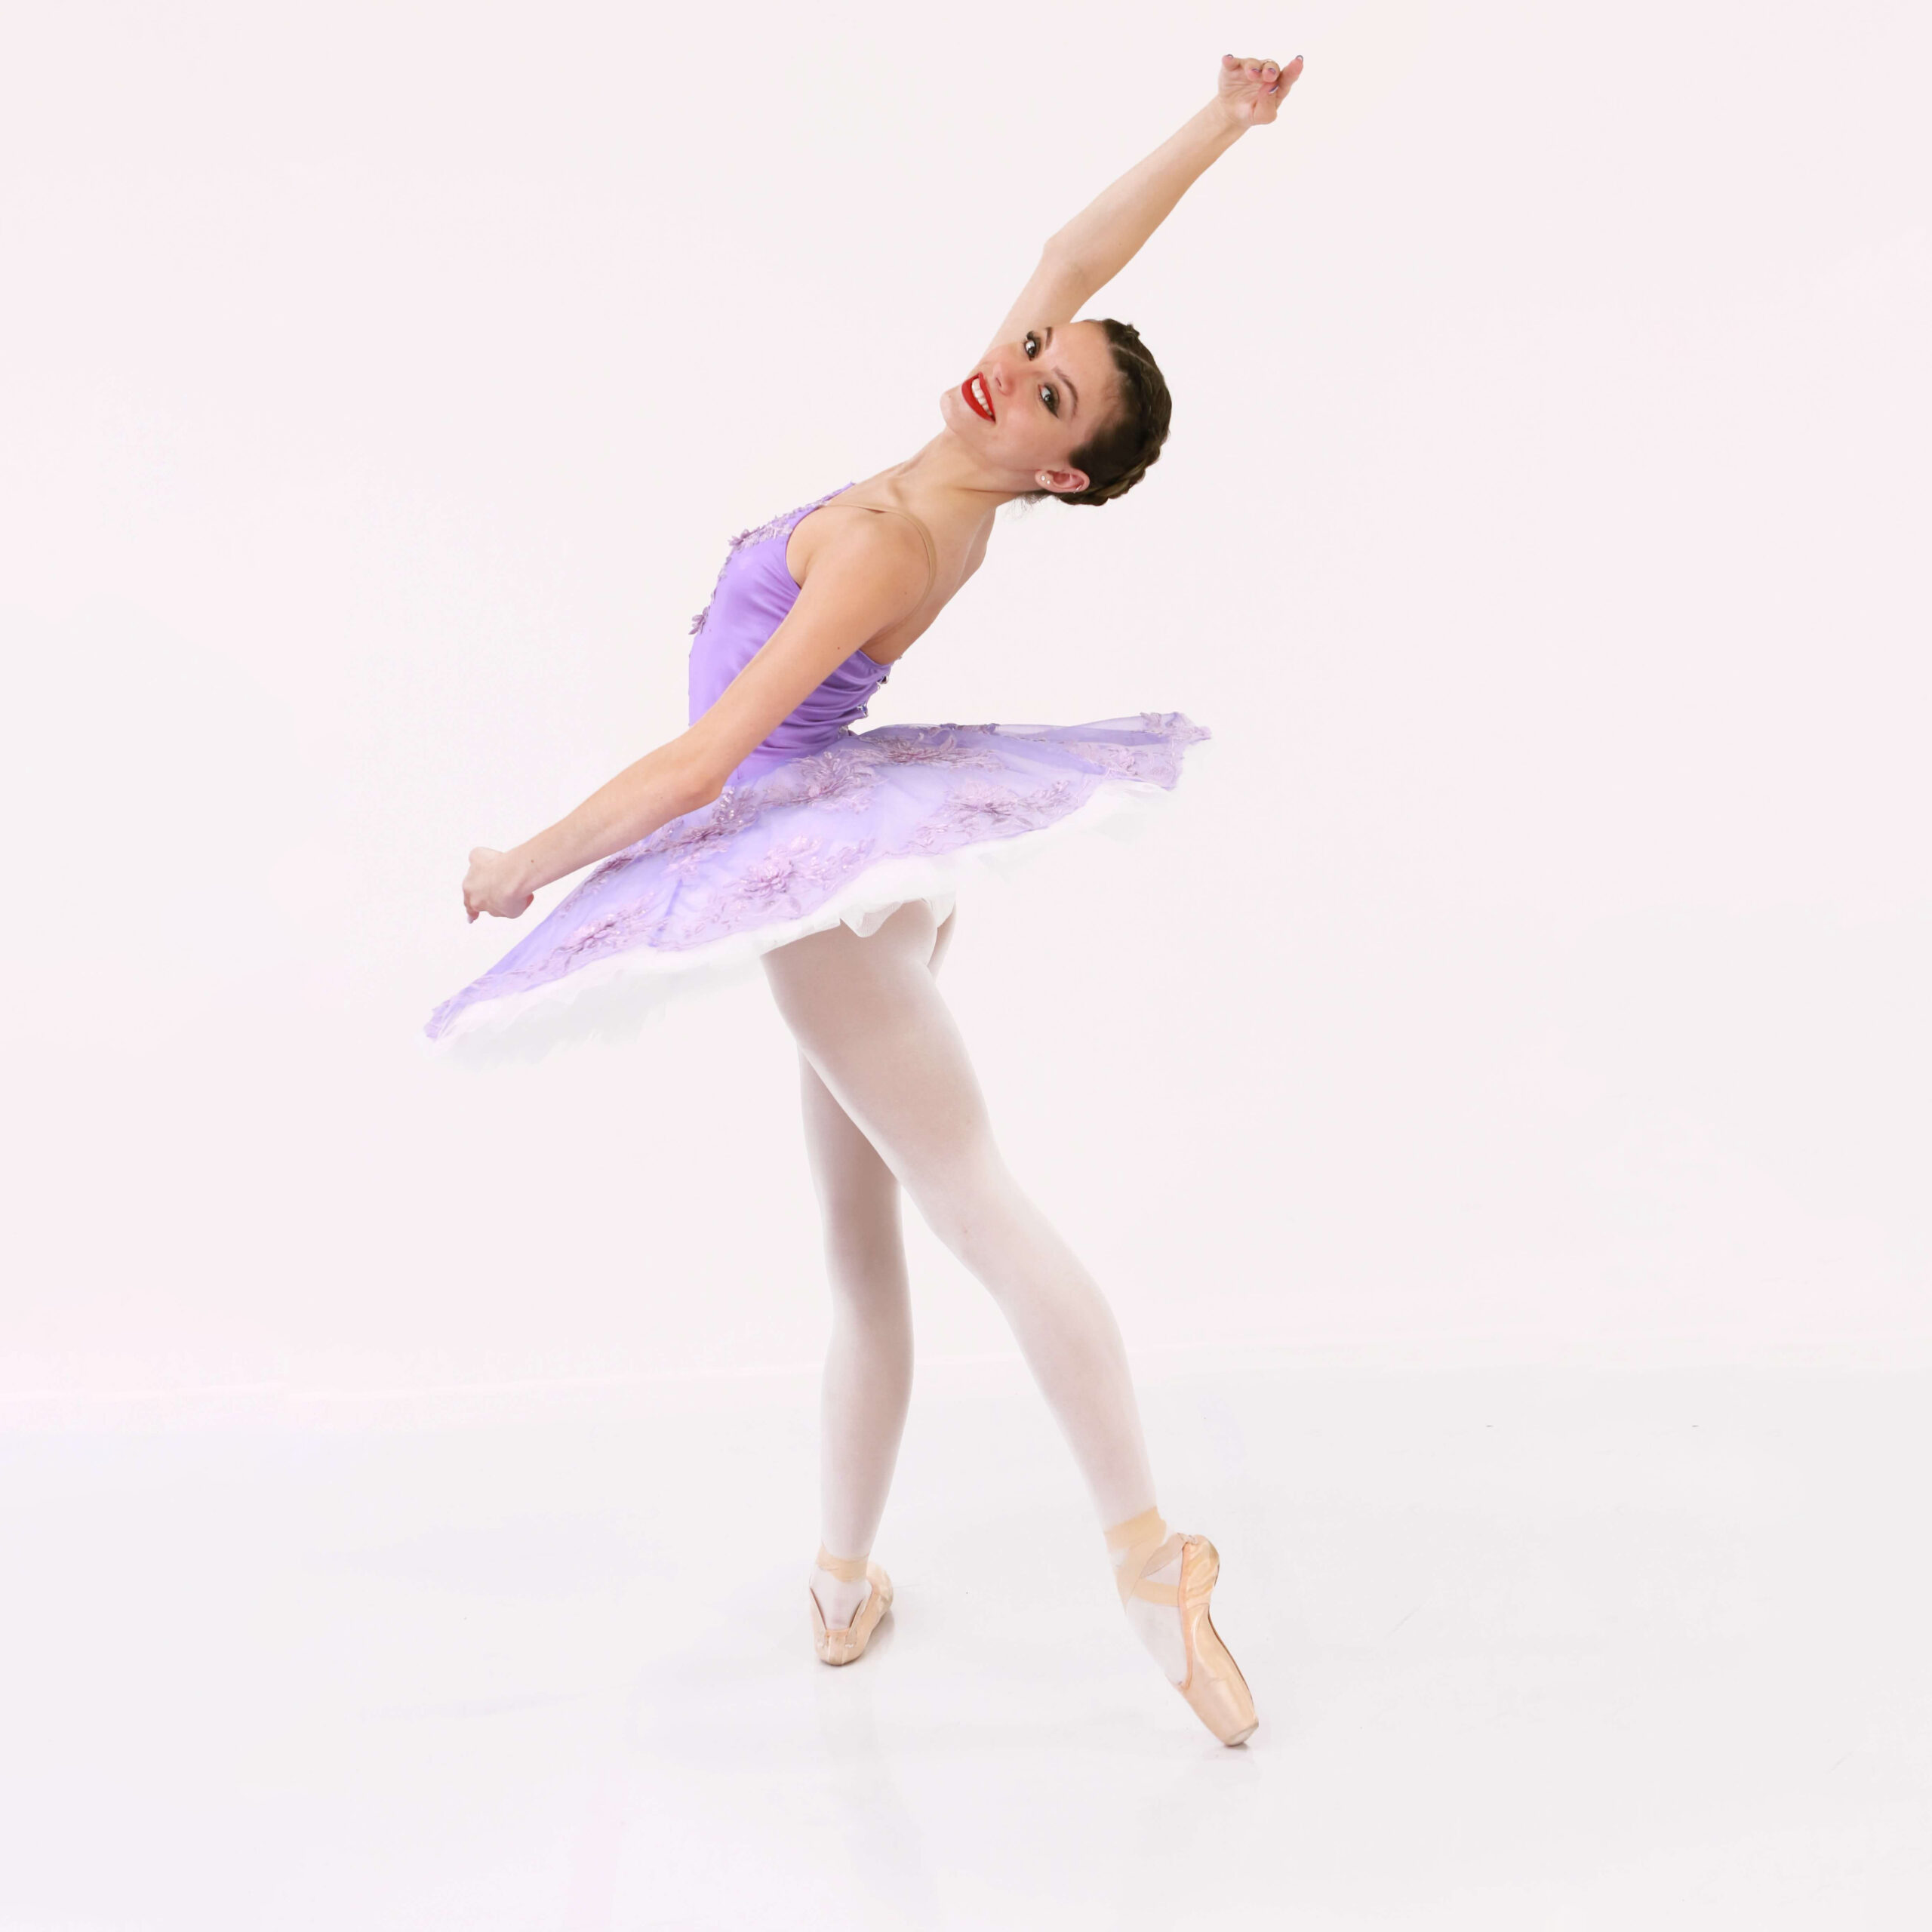 RAD ballet dancer from The Dance Shoppe in Milton in a ballet pose wearing a purple ballet costume